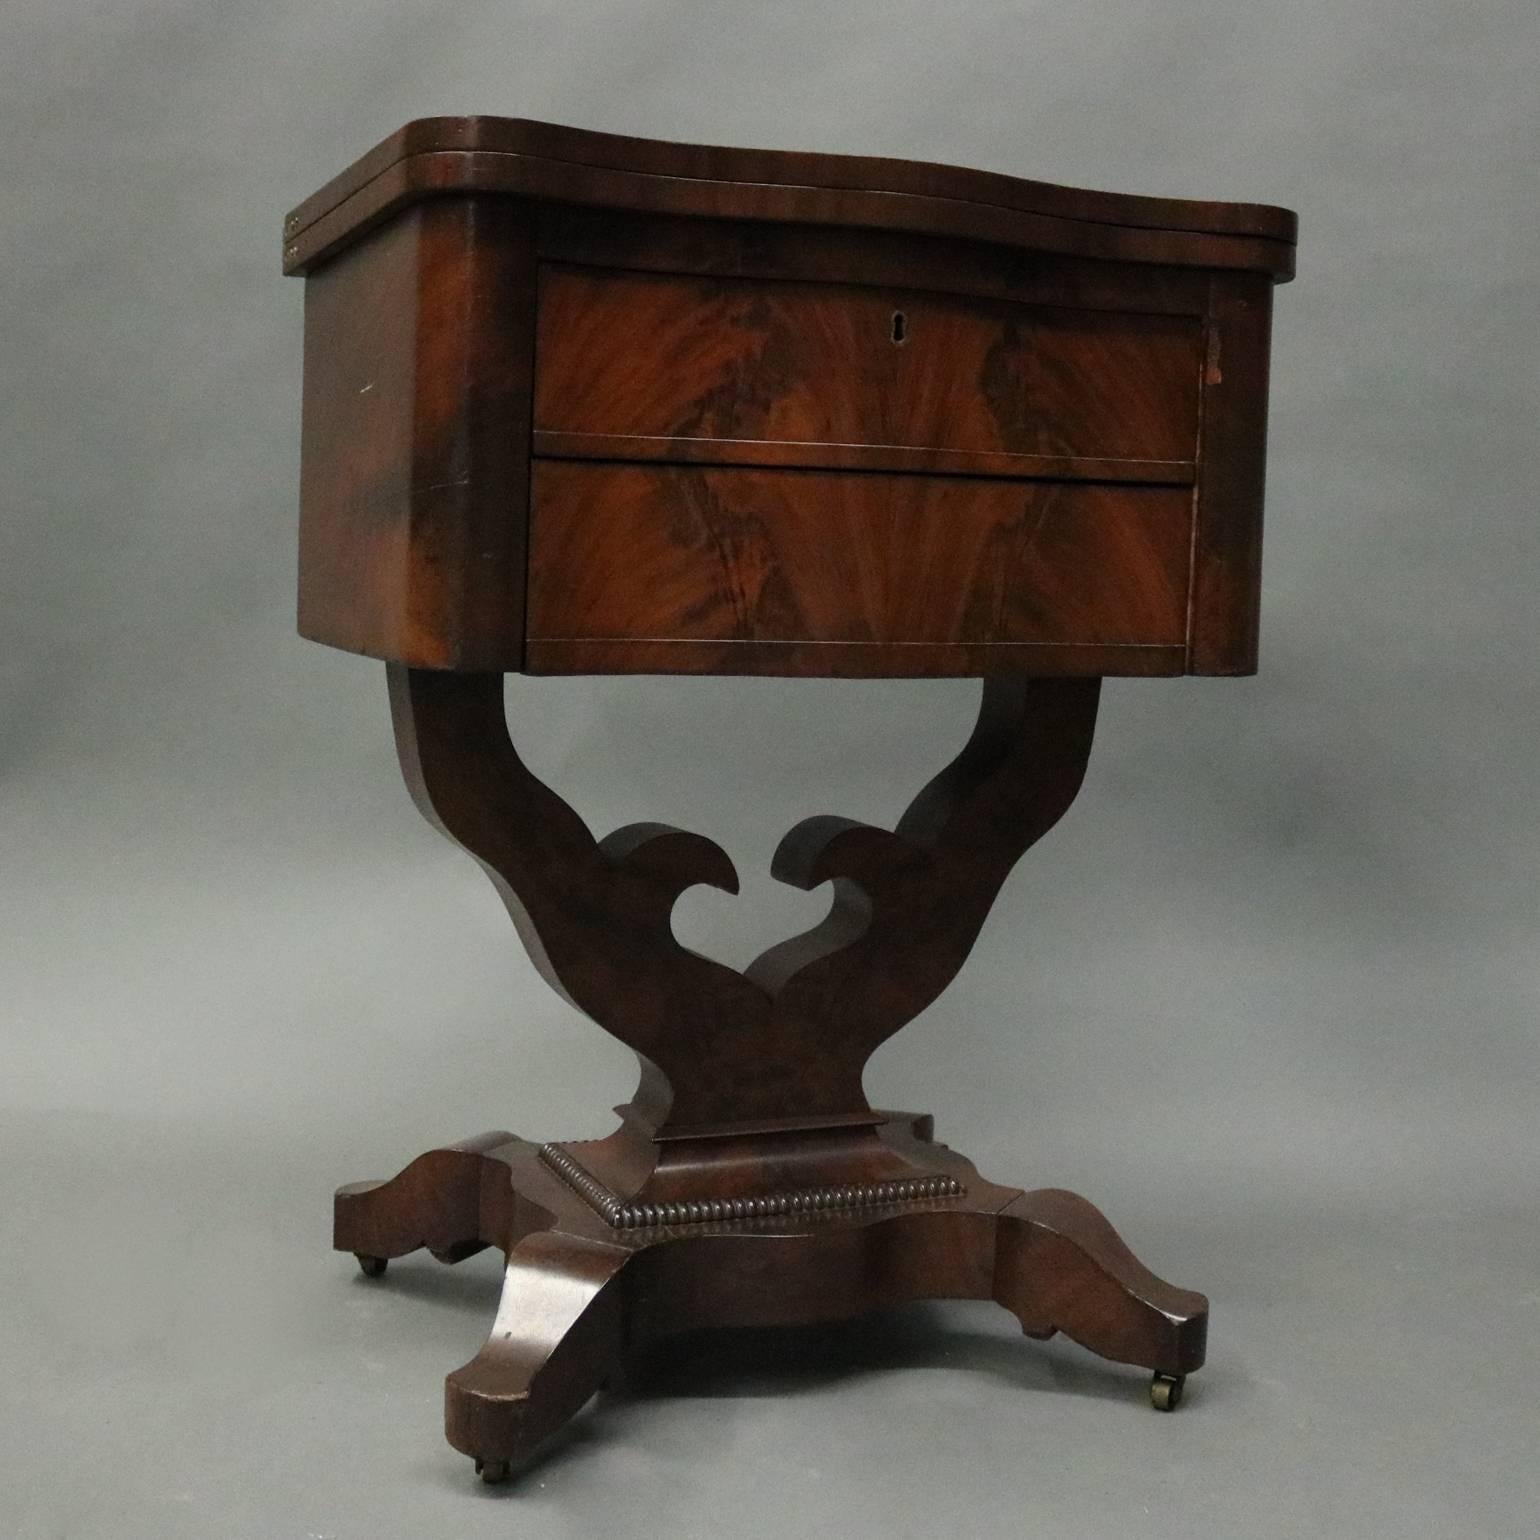 Antique flame mahogany American Empire sewing stand features serpentine front two-drawer cabinet atop open plinth, top opening and swivels to seat and provide work surface or game table, circa 1880.

Measures -30.5" H X 23" W X 16"